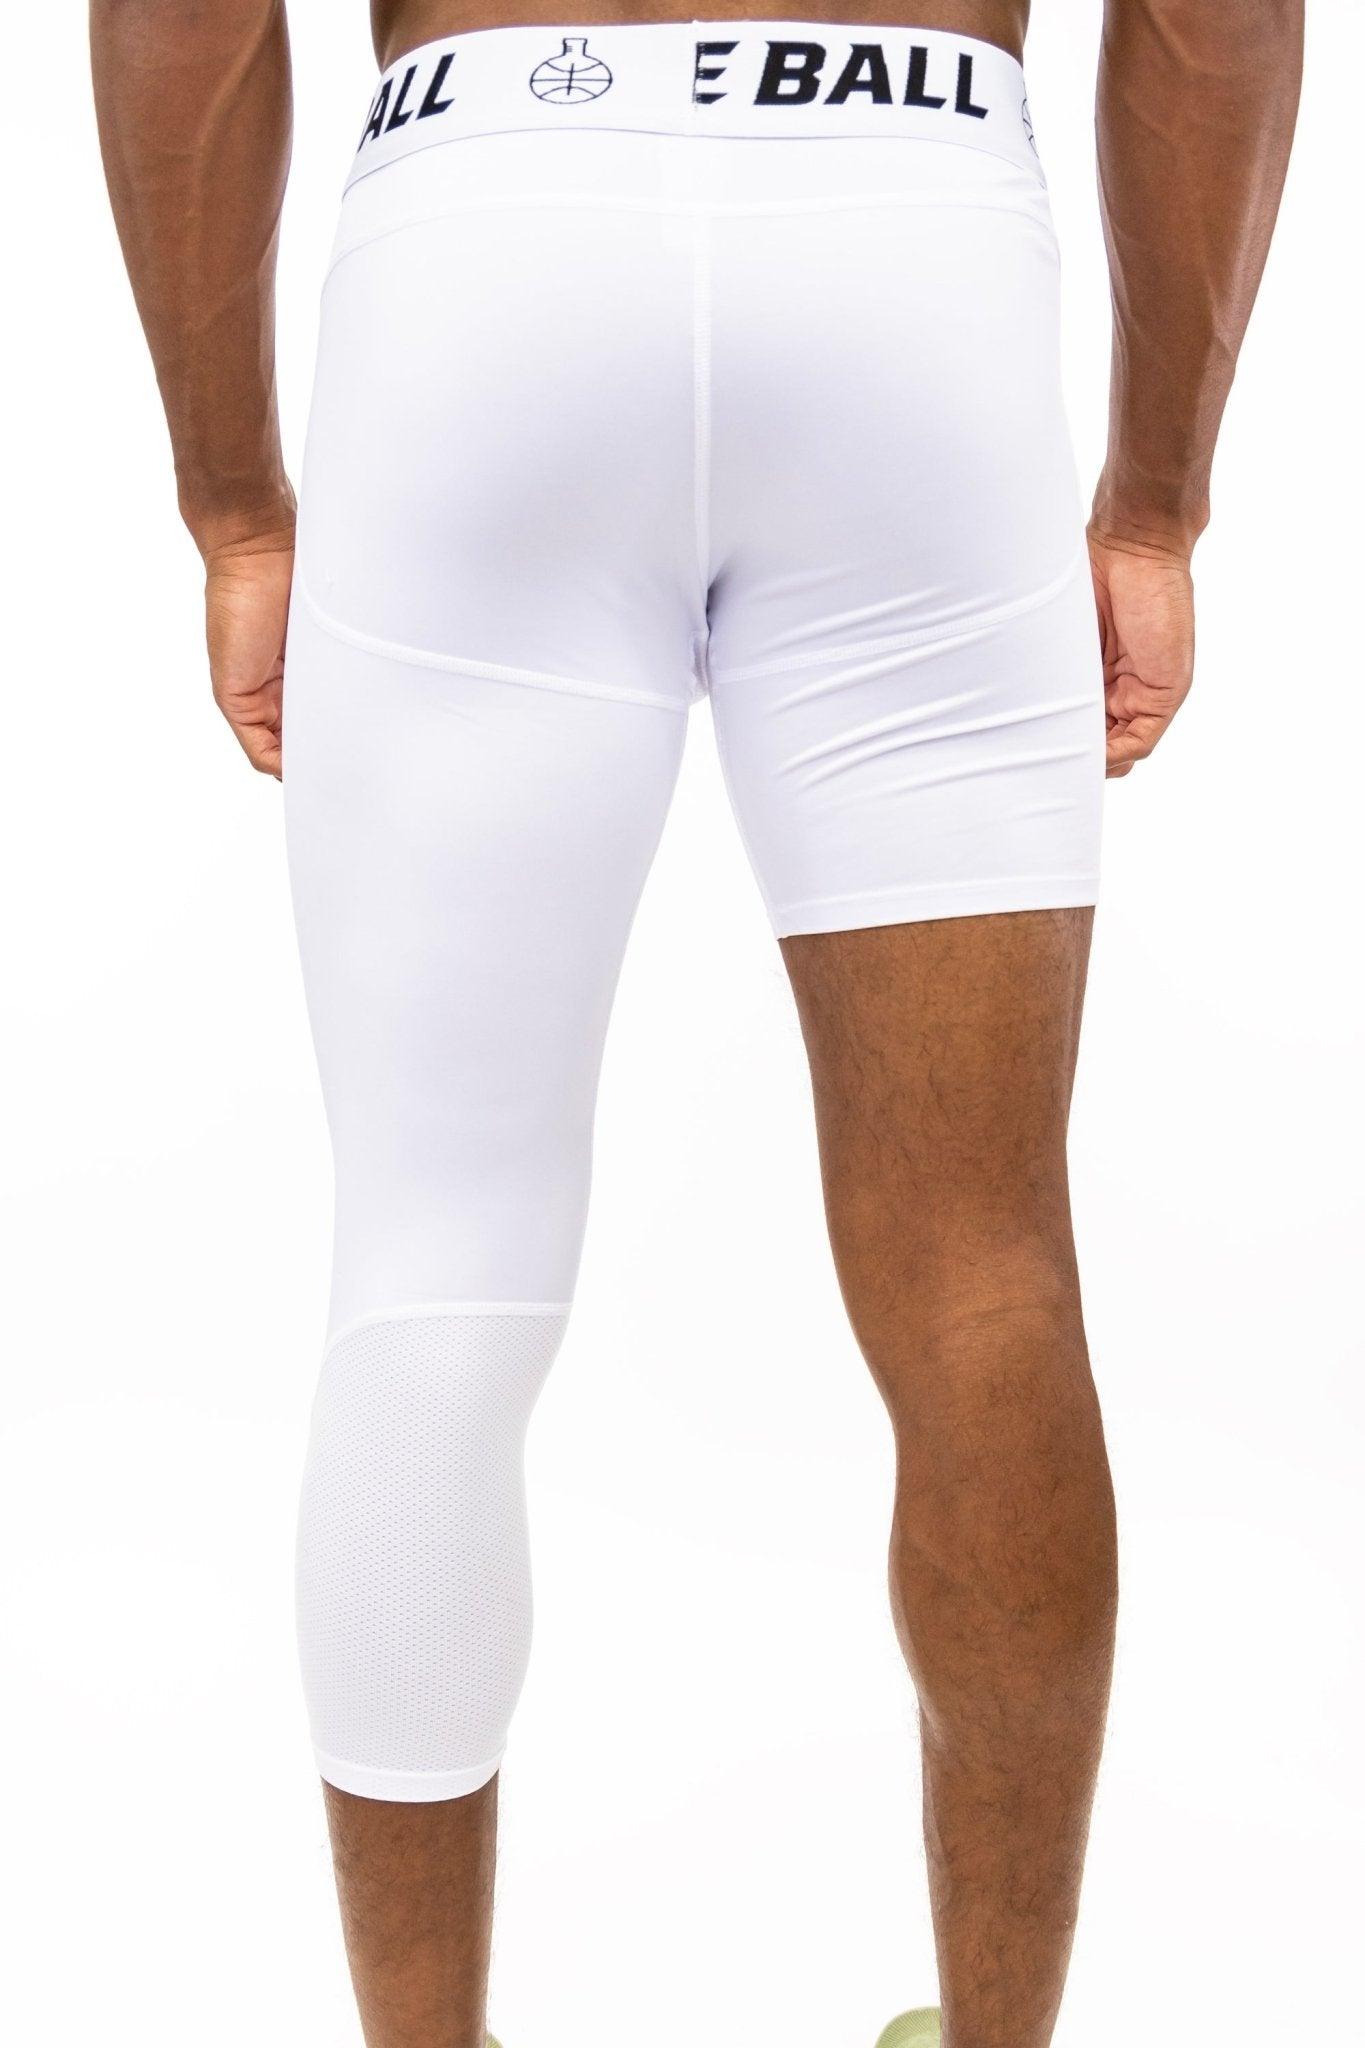 ITL x WBS ISO LEG WBTECH™ TIGHTS (WHITE) - In The Lab